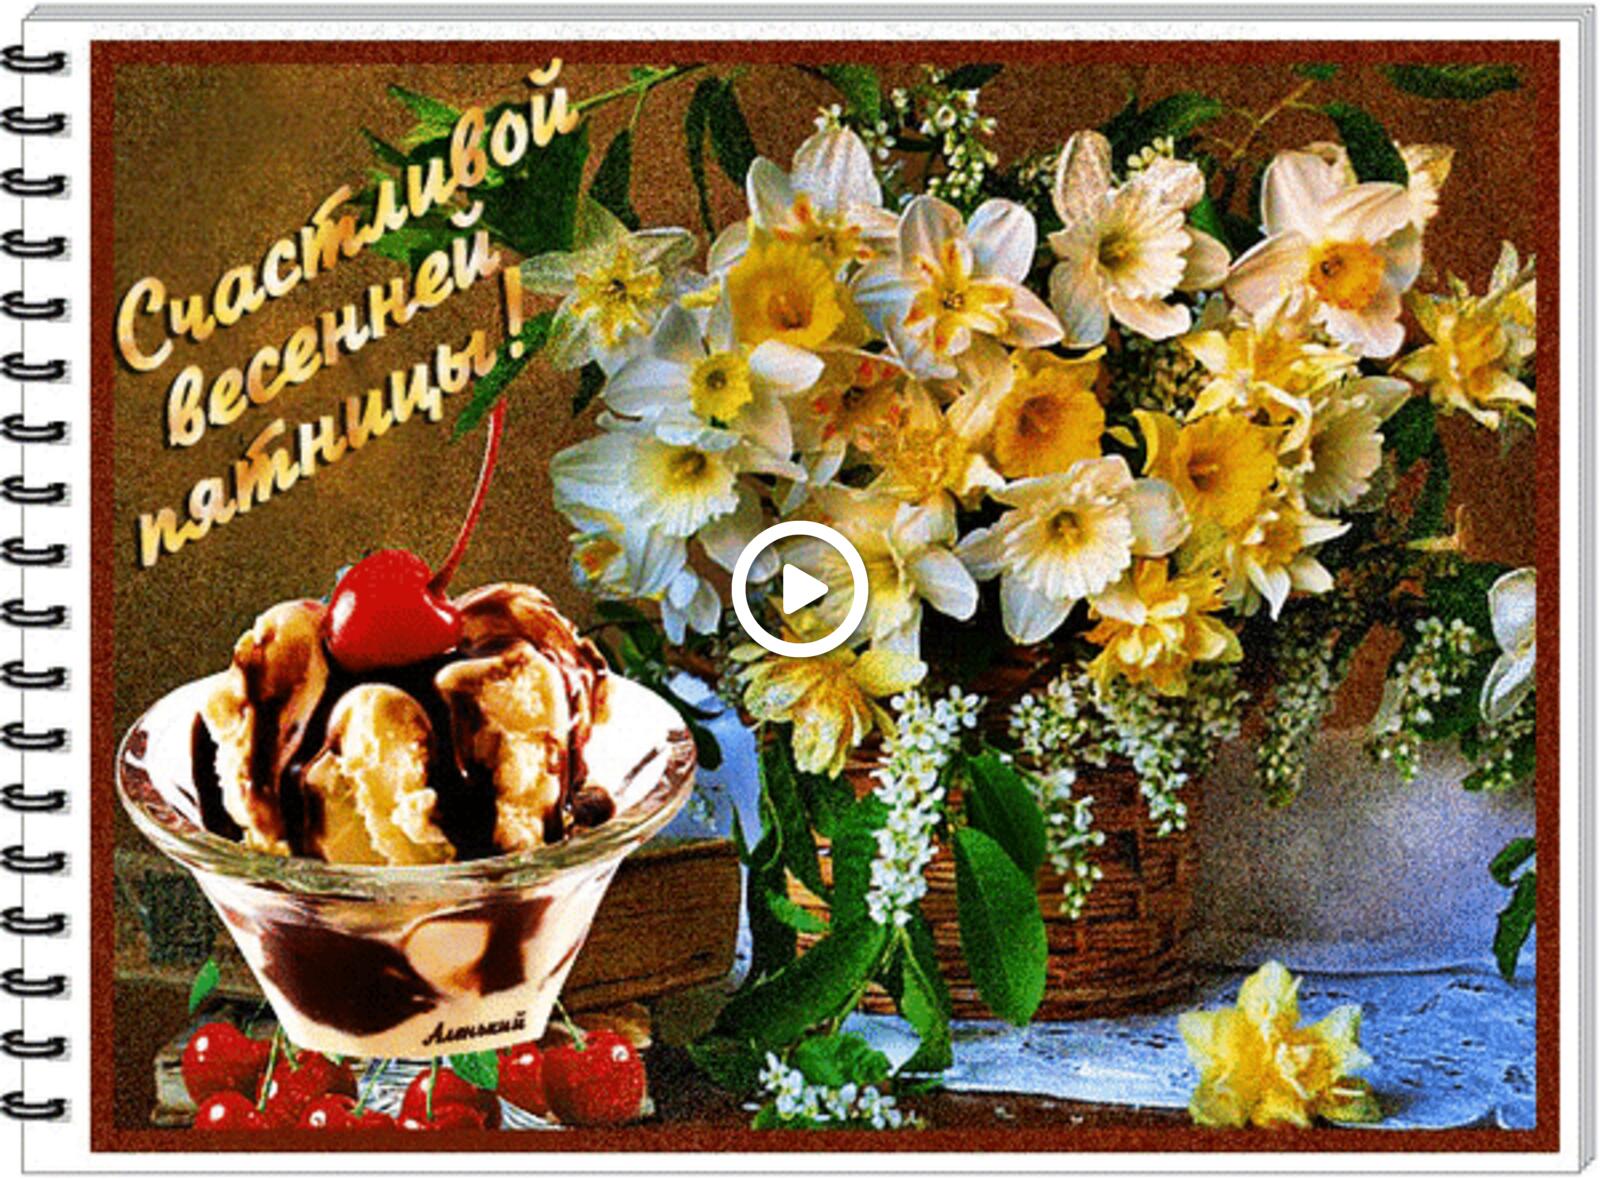 A postcard on the subject of friday ice cream flowers for free